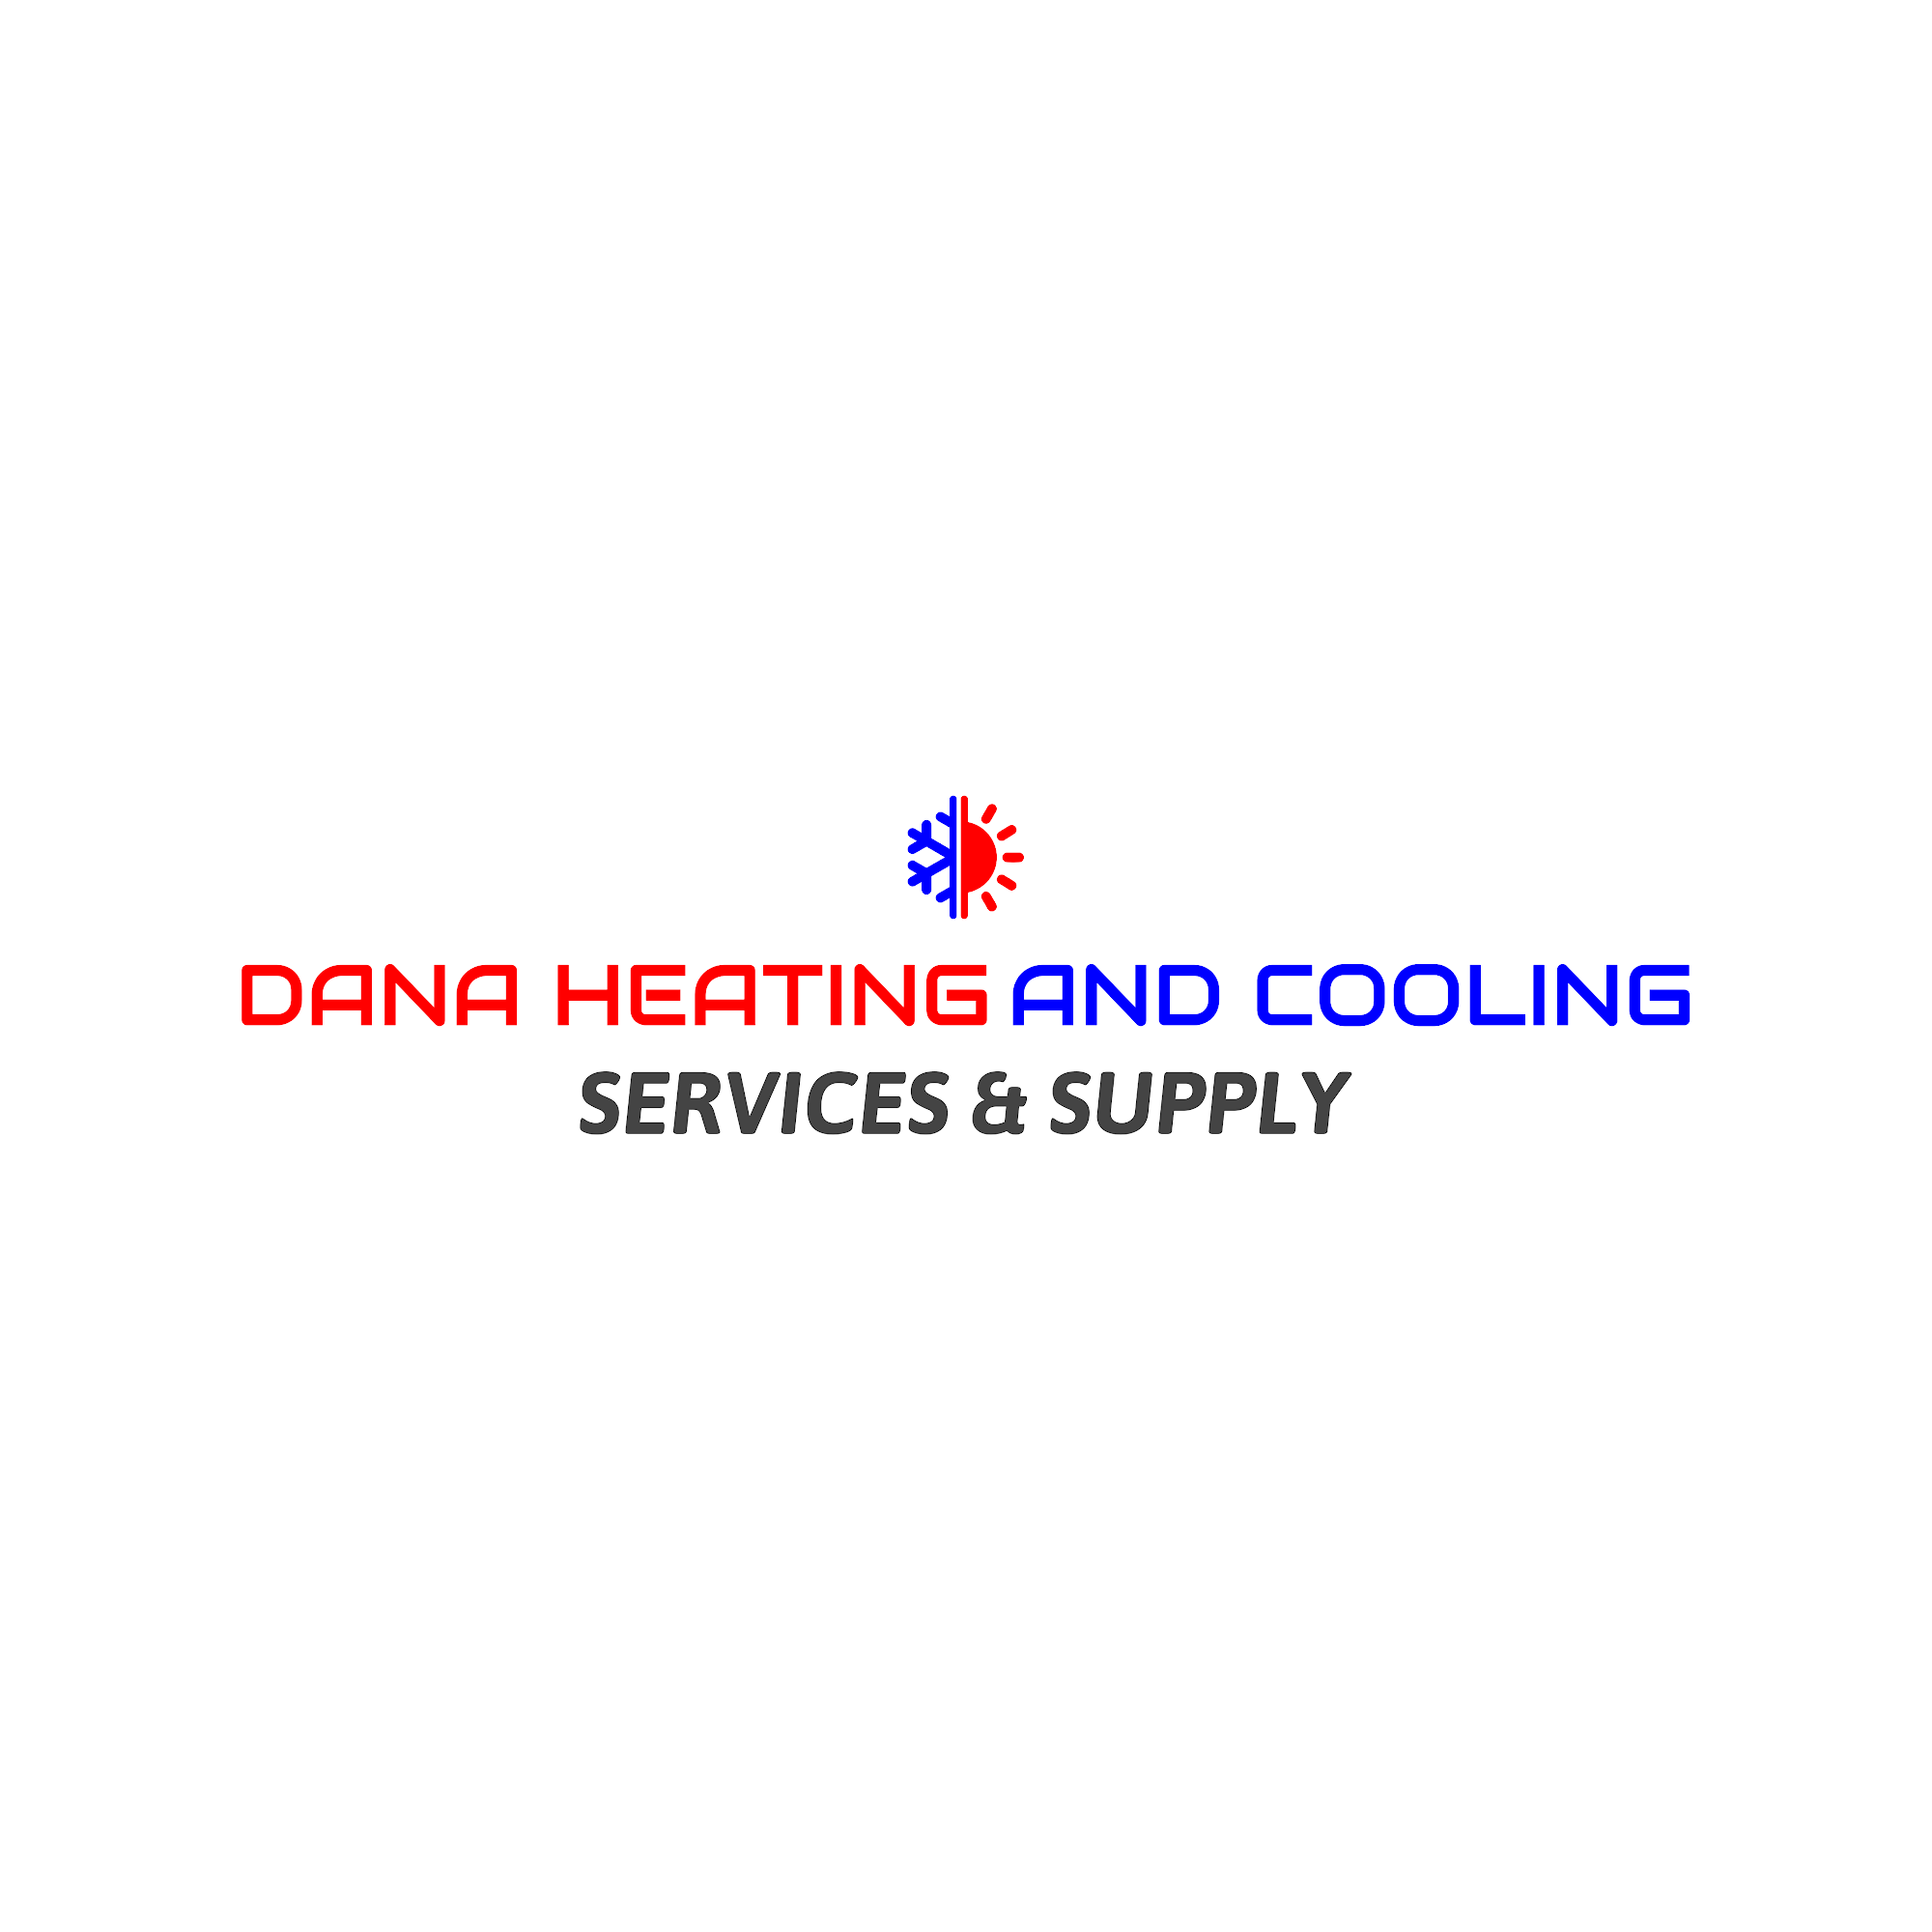 Dana heating and cooling